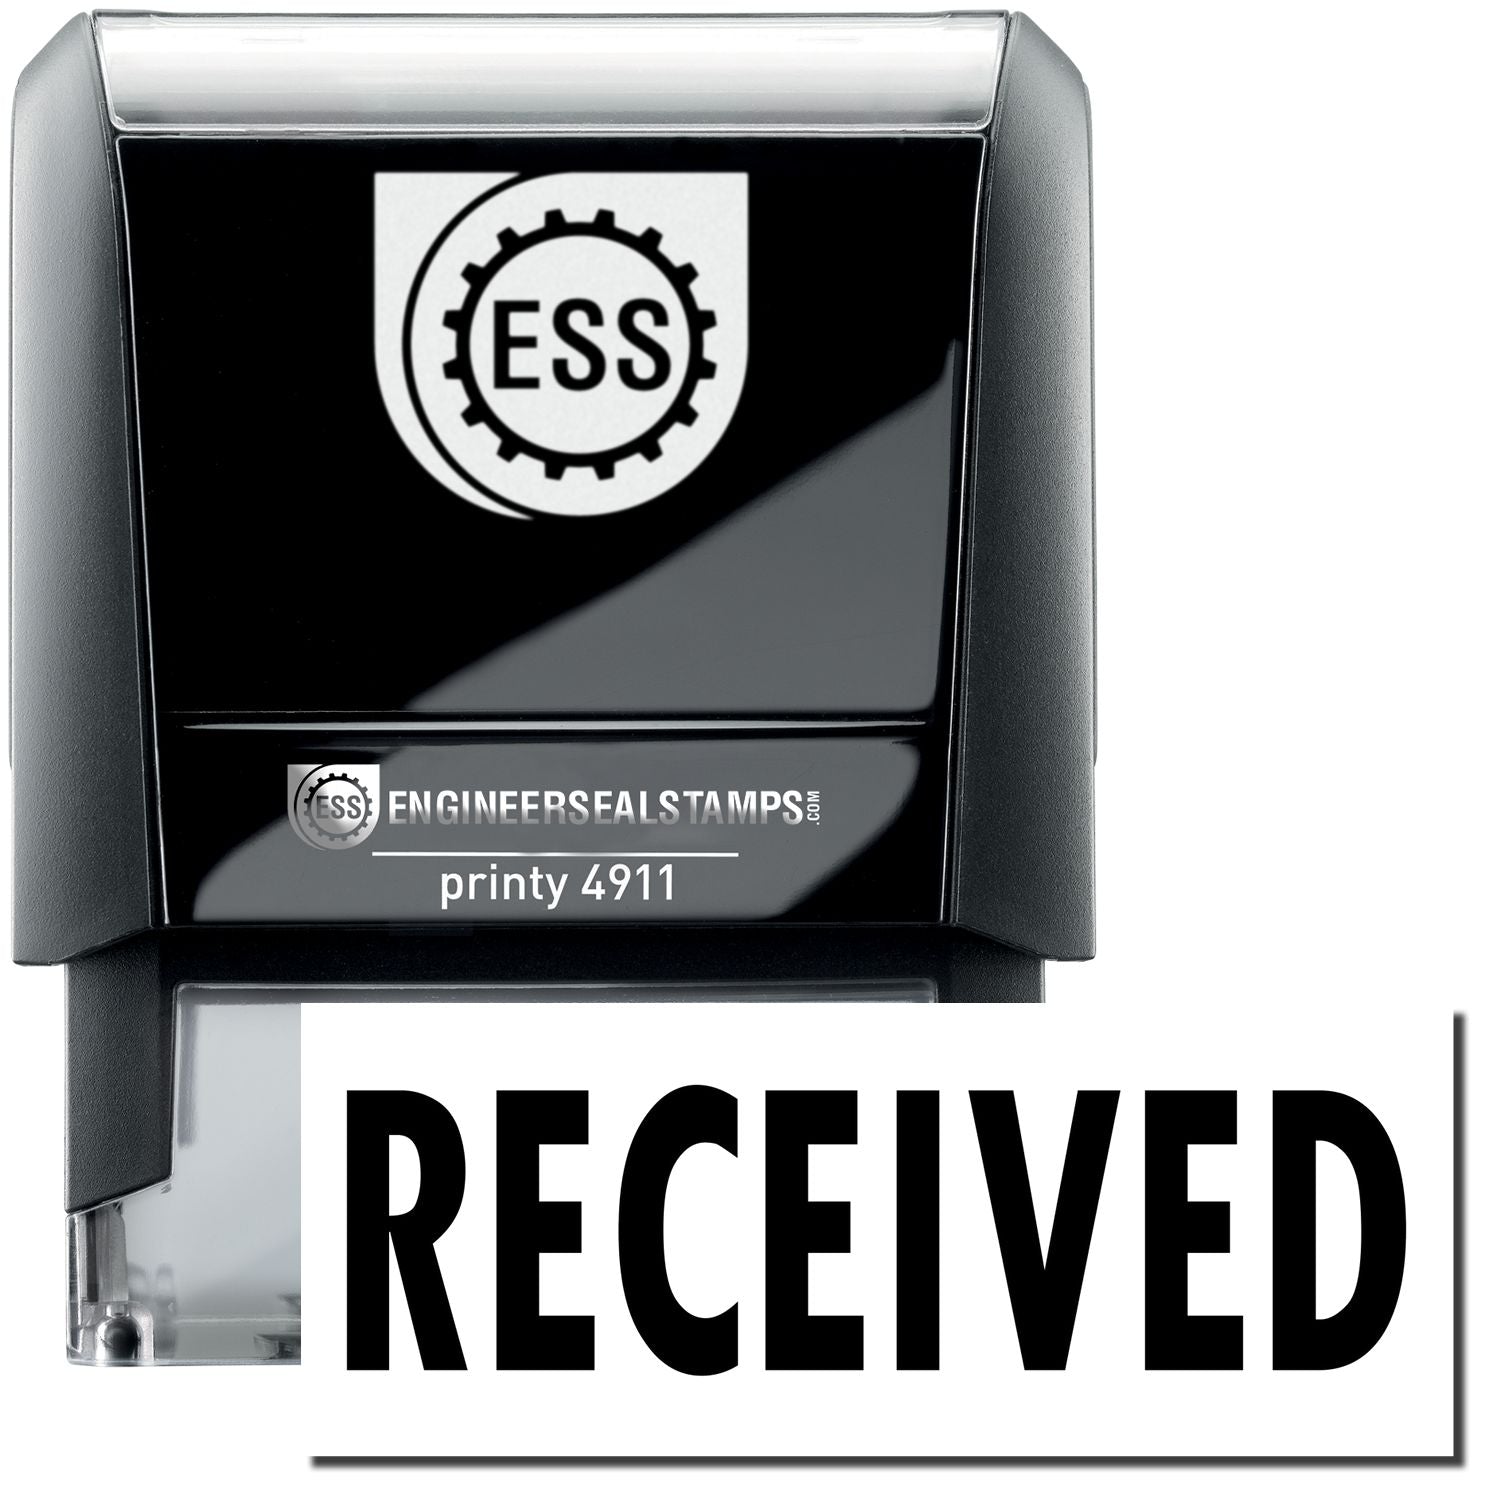 A self-inking stamp with a stamped image showing how the text "RECEIVED" is displayed after stamping.